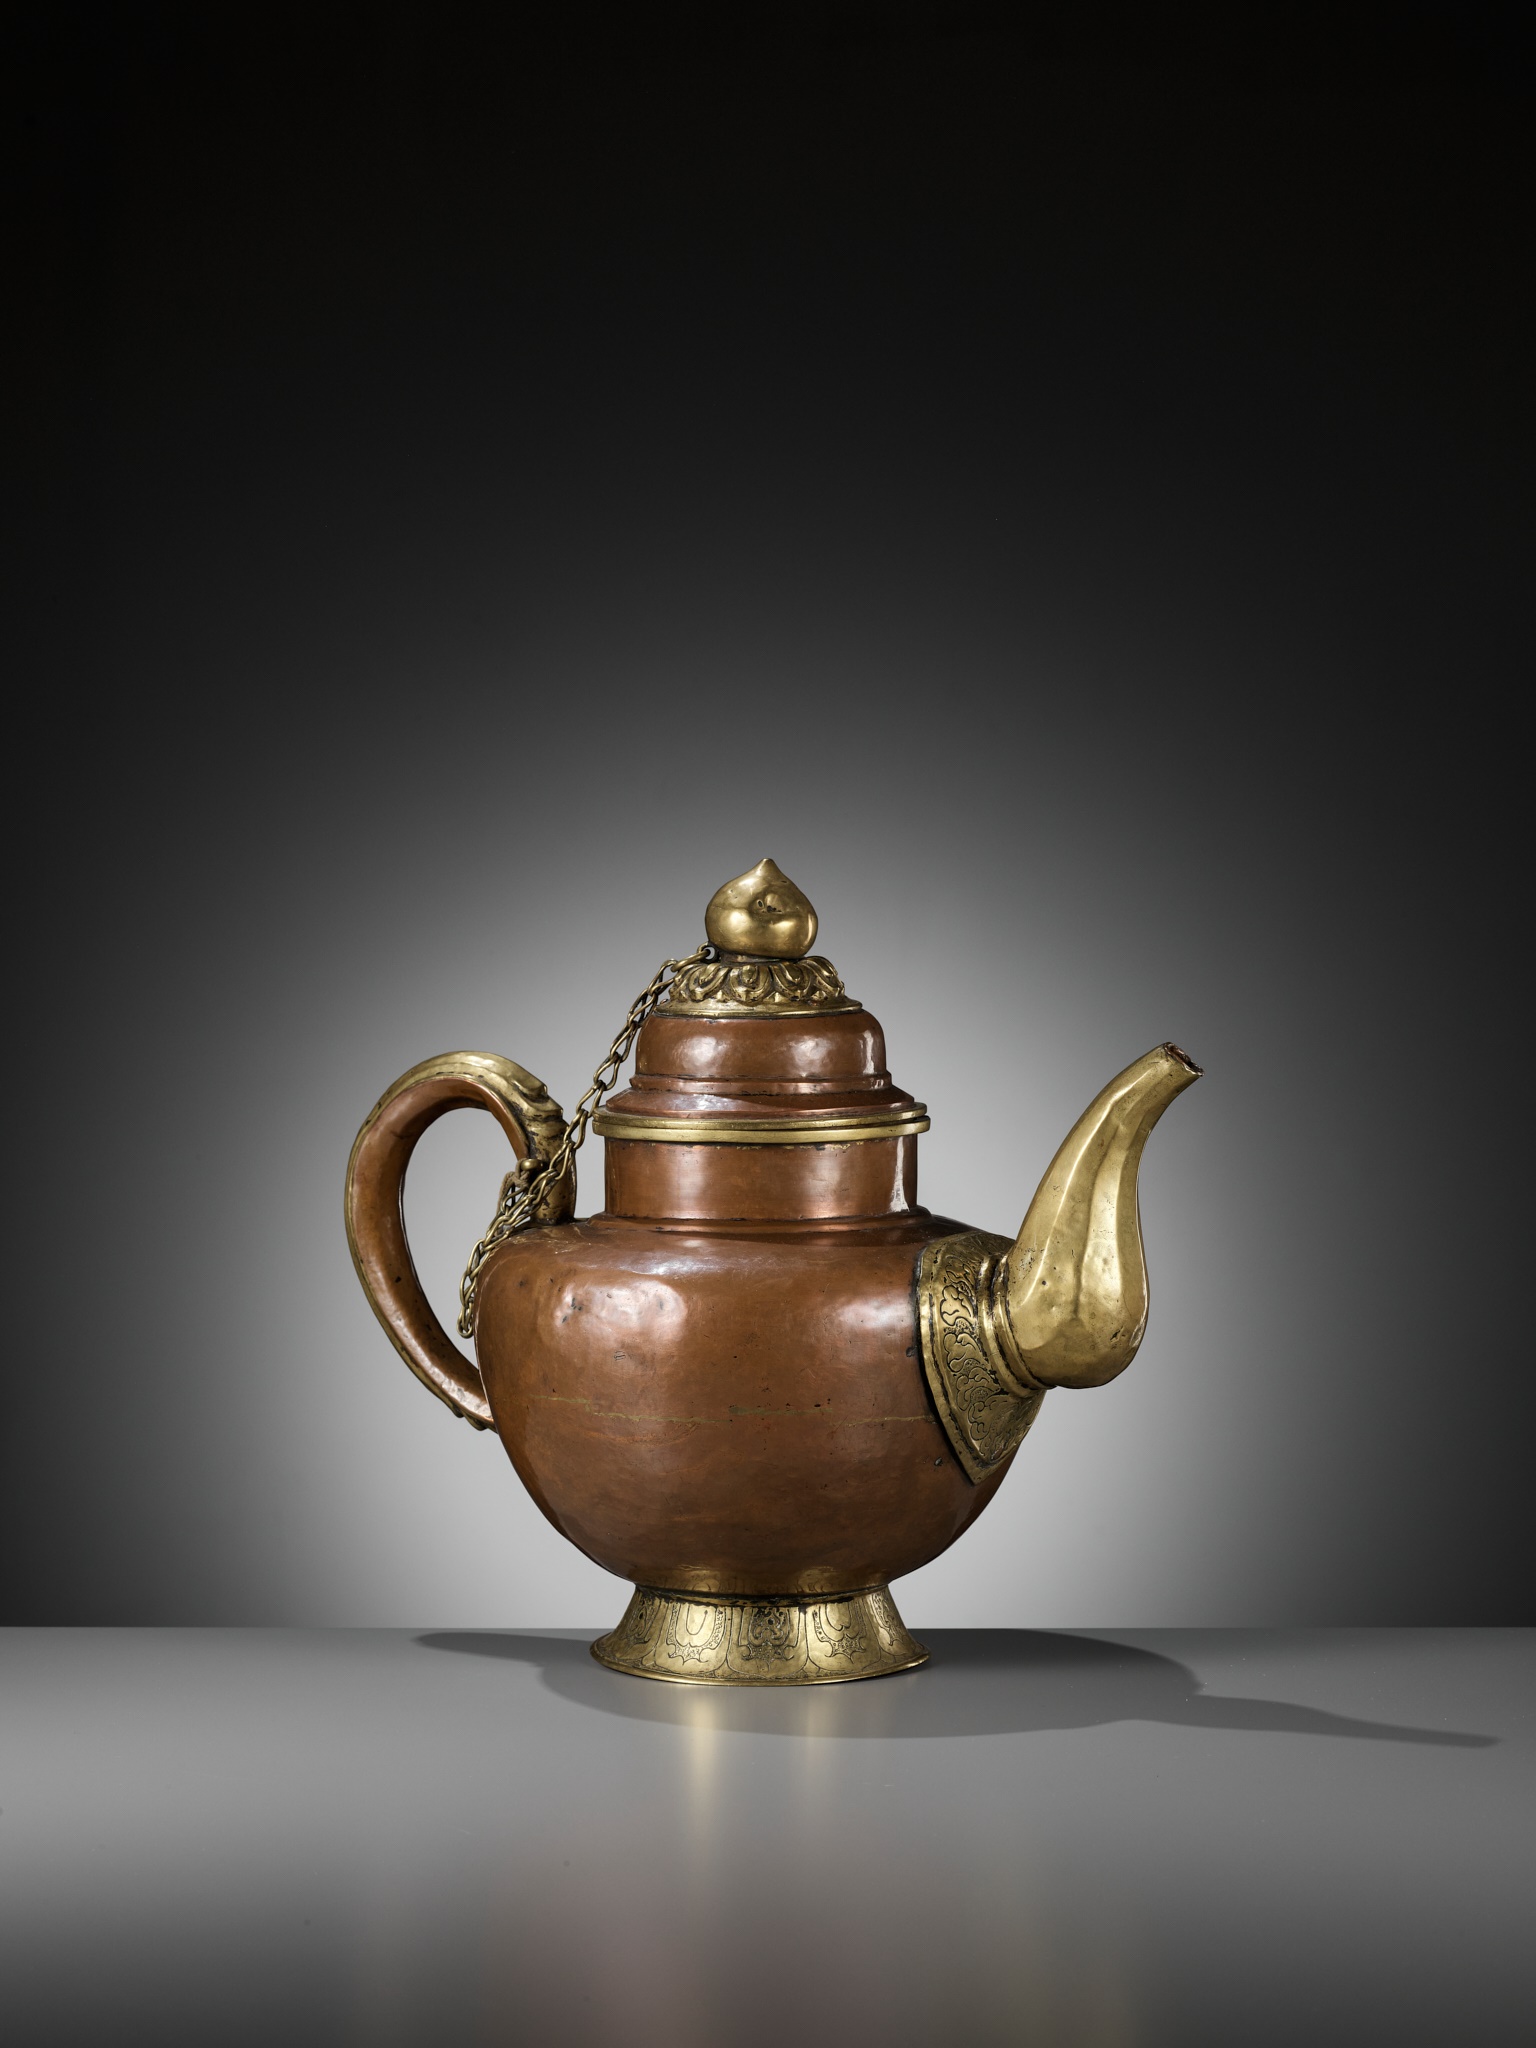 A LARGE BRASS TEAPOT WITH COPPER DETAILS. Tibet, early 20th c. Height 29.5  cm. Very slightly dented.